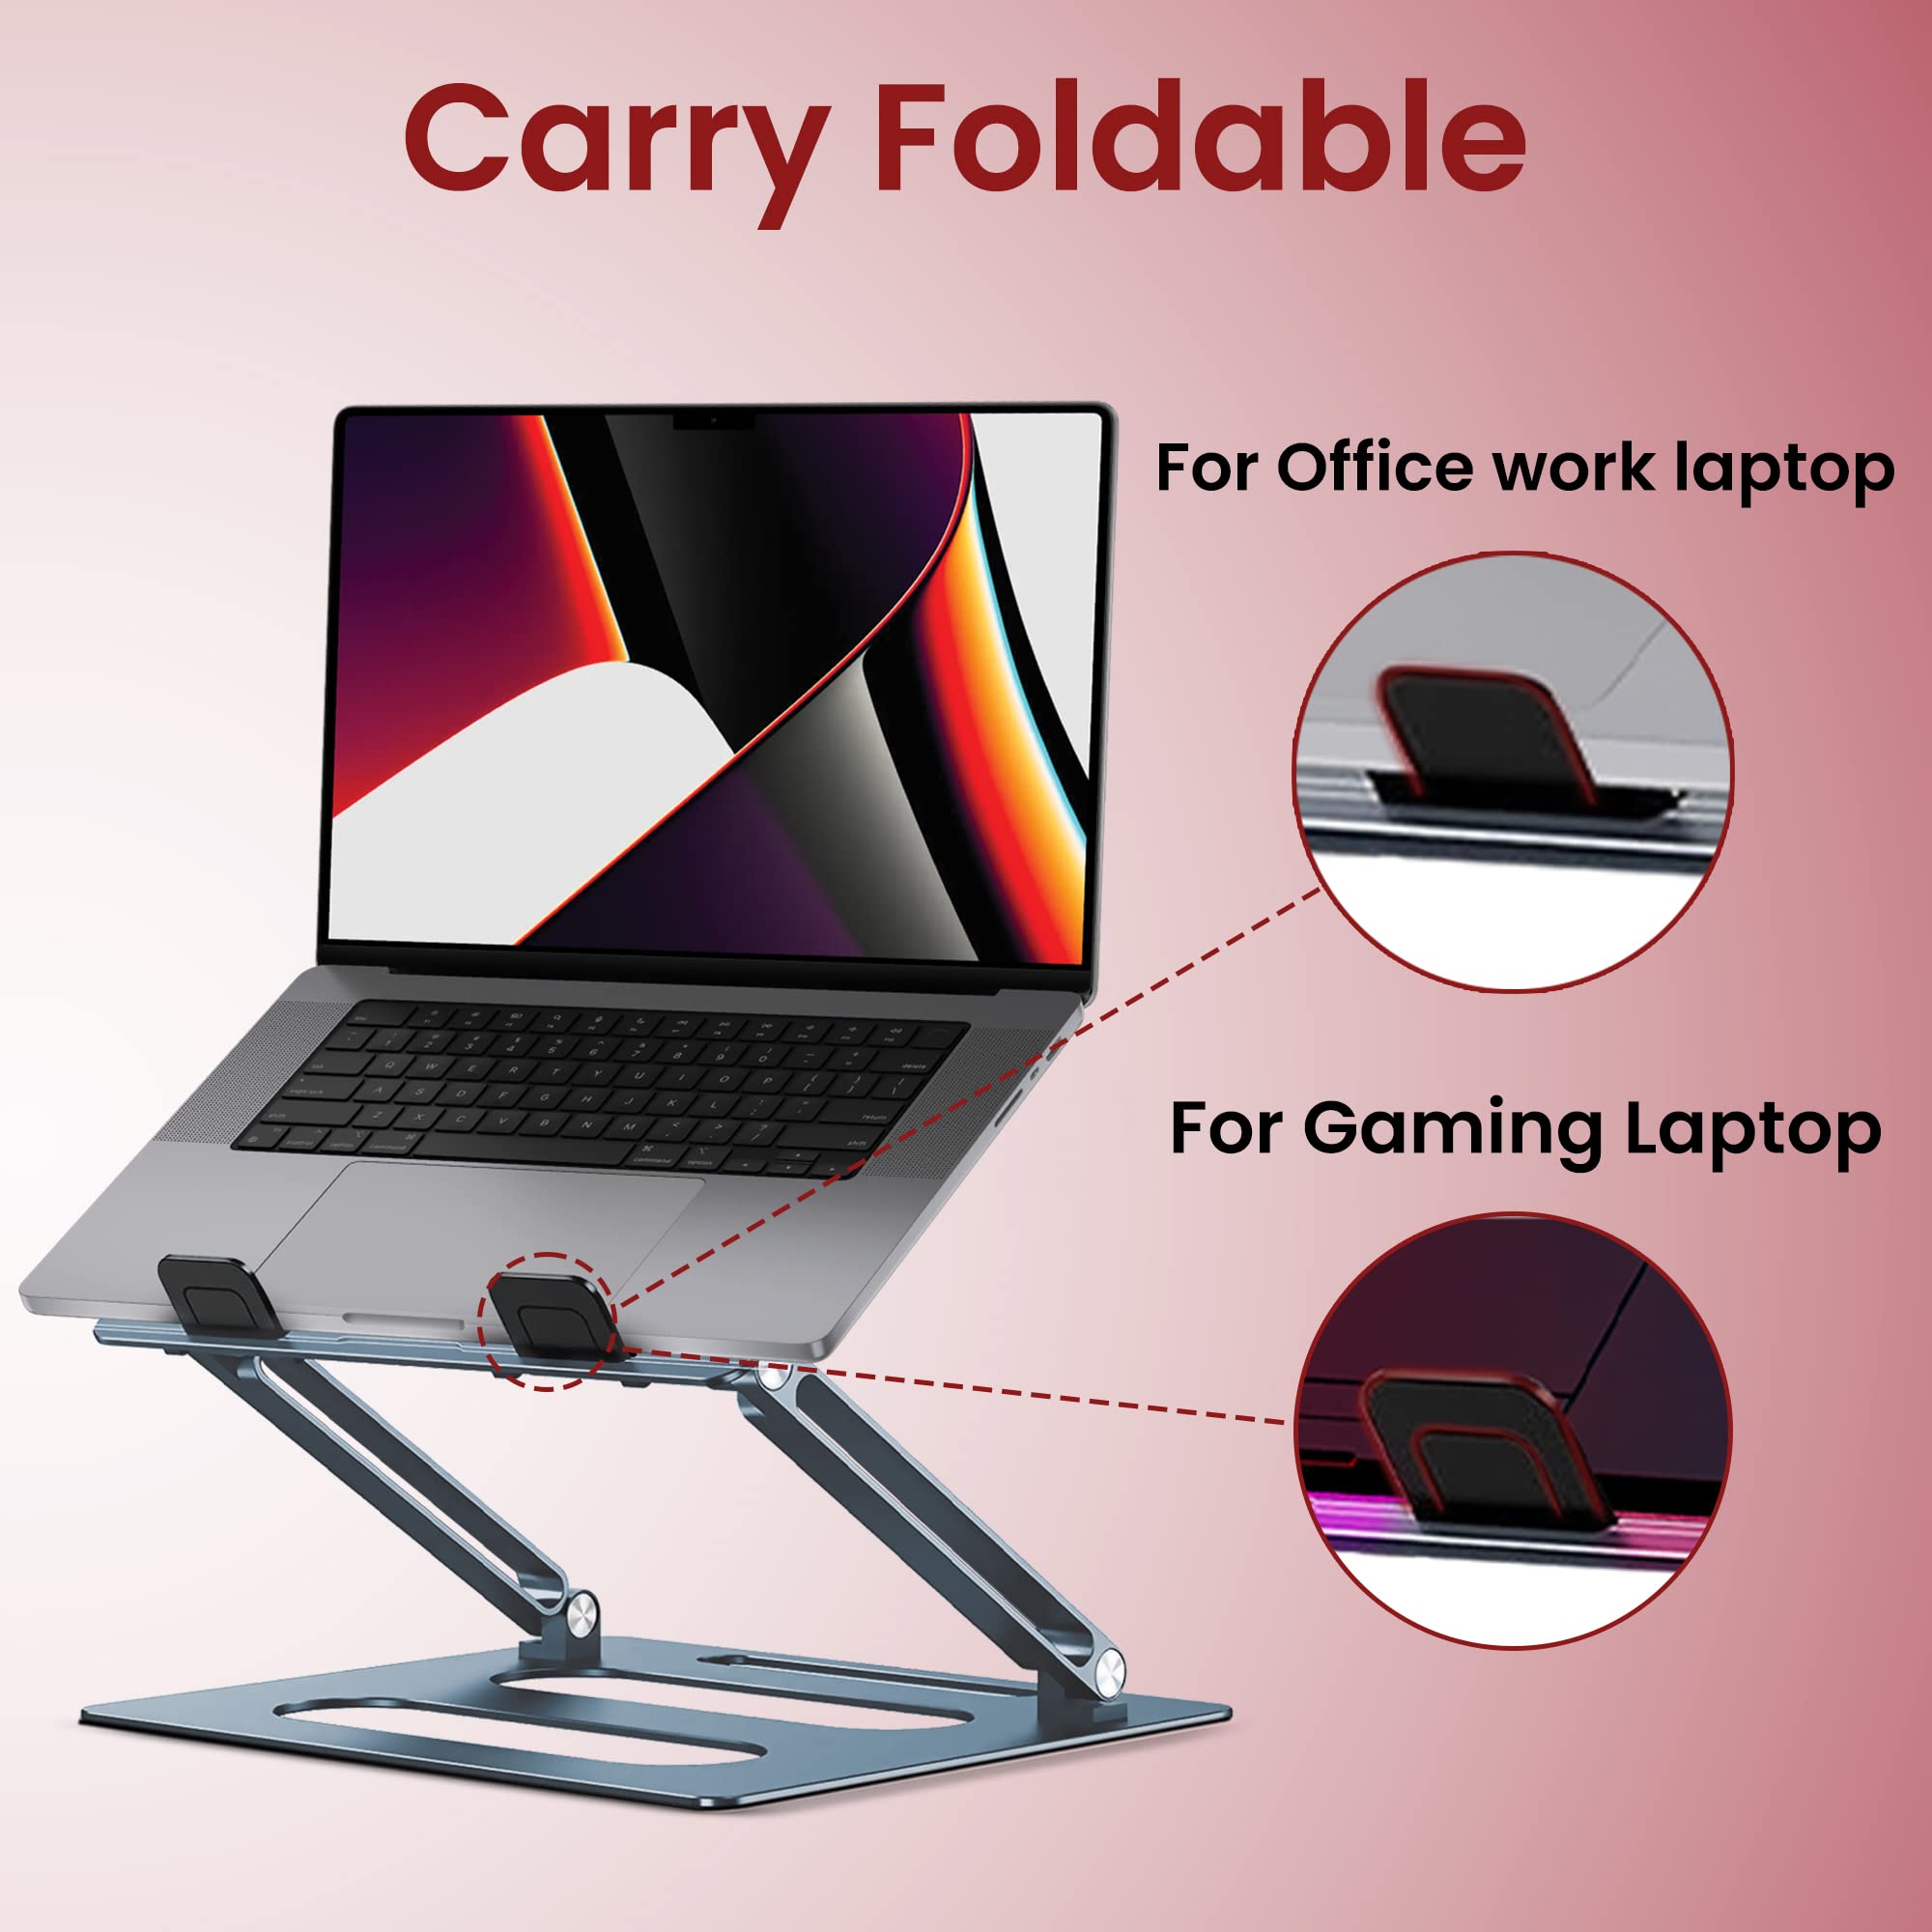 Moxedo Foldable Aluminum Laptop Stand With Phone Holder Compatible for MacBook Apple Mac Pro Air Dell Hp and More Laptops 11 Up to 15 inch